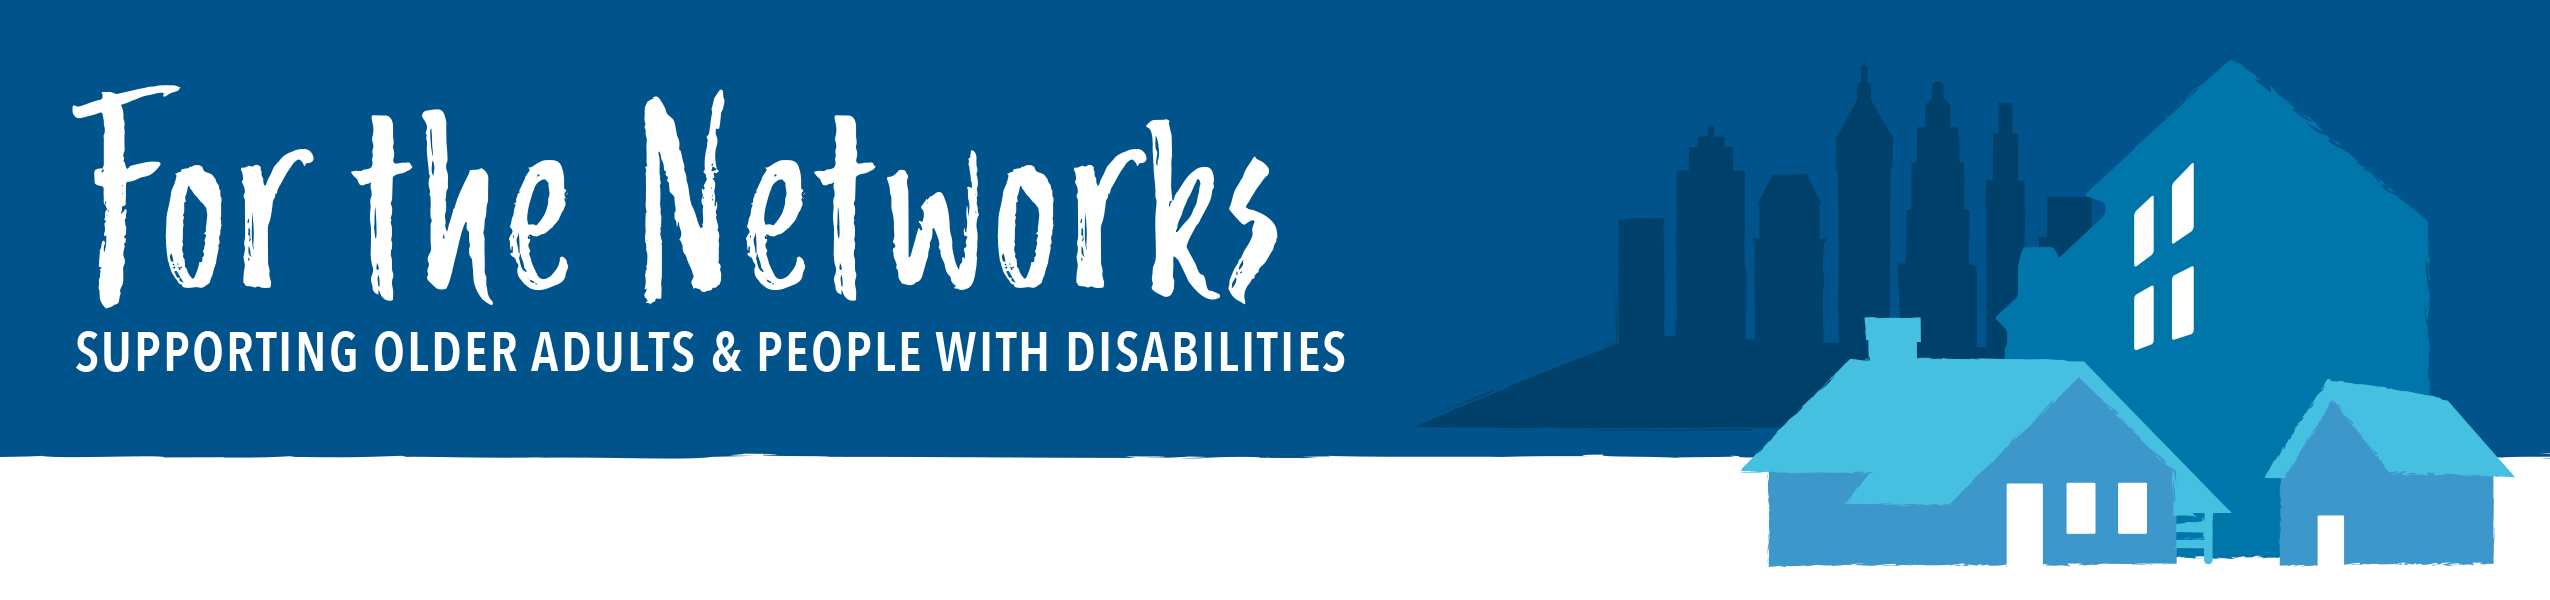 For the networks supporting older adults and people with disabilities